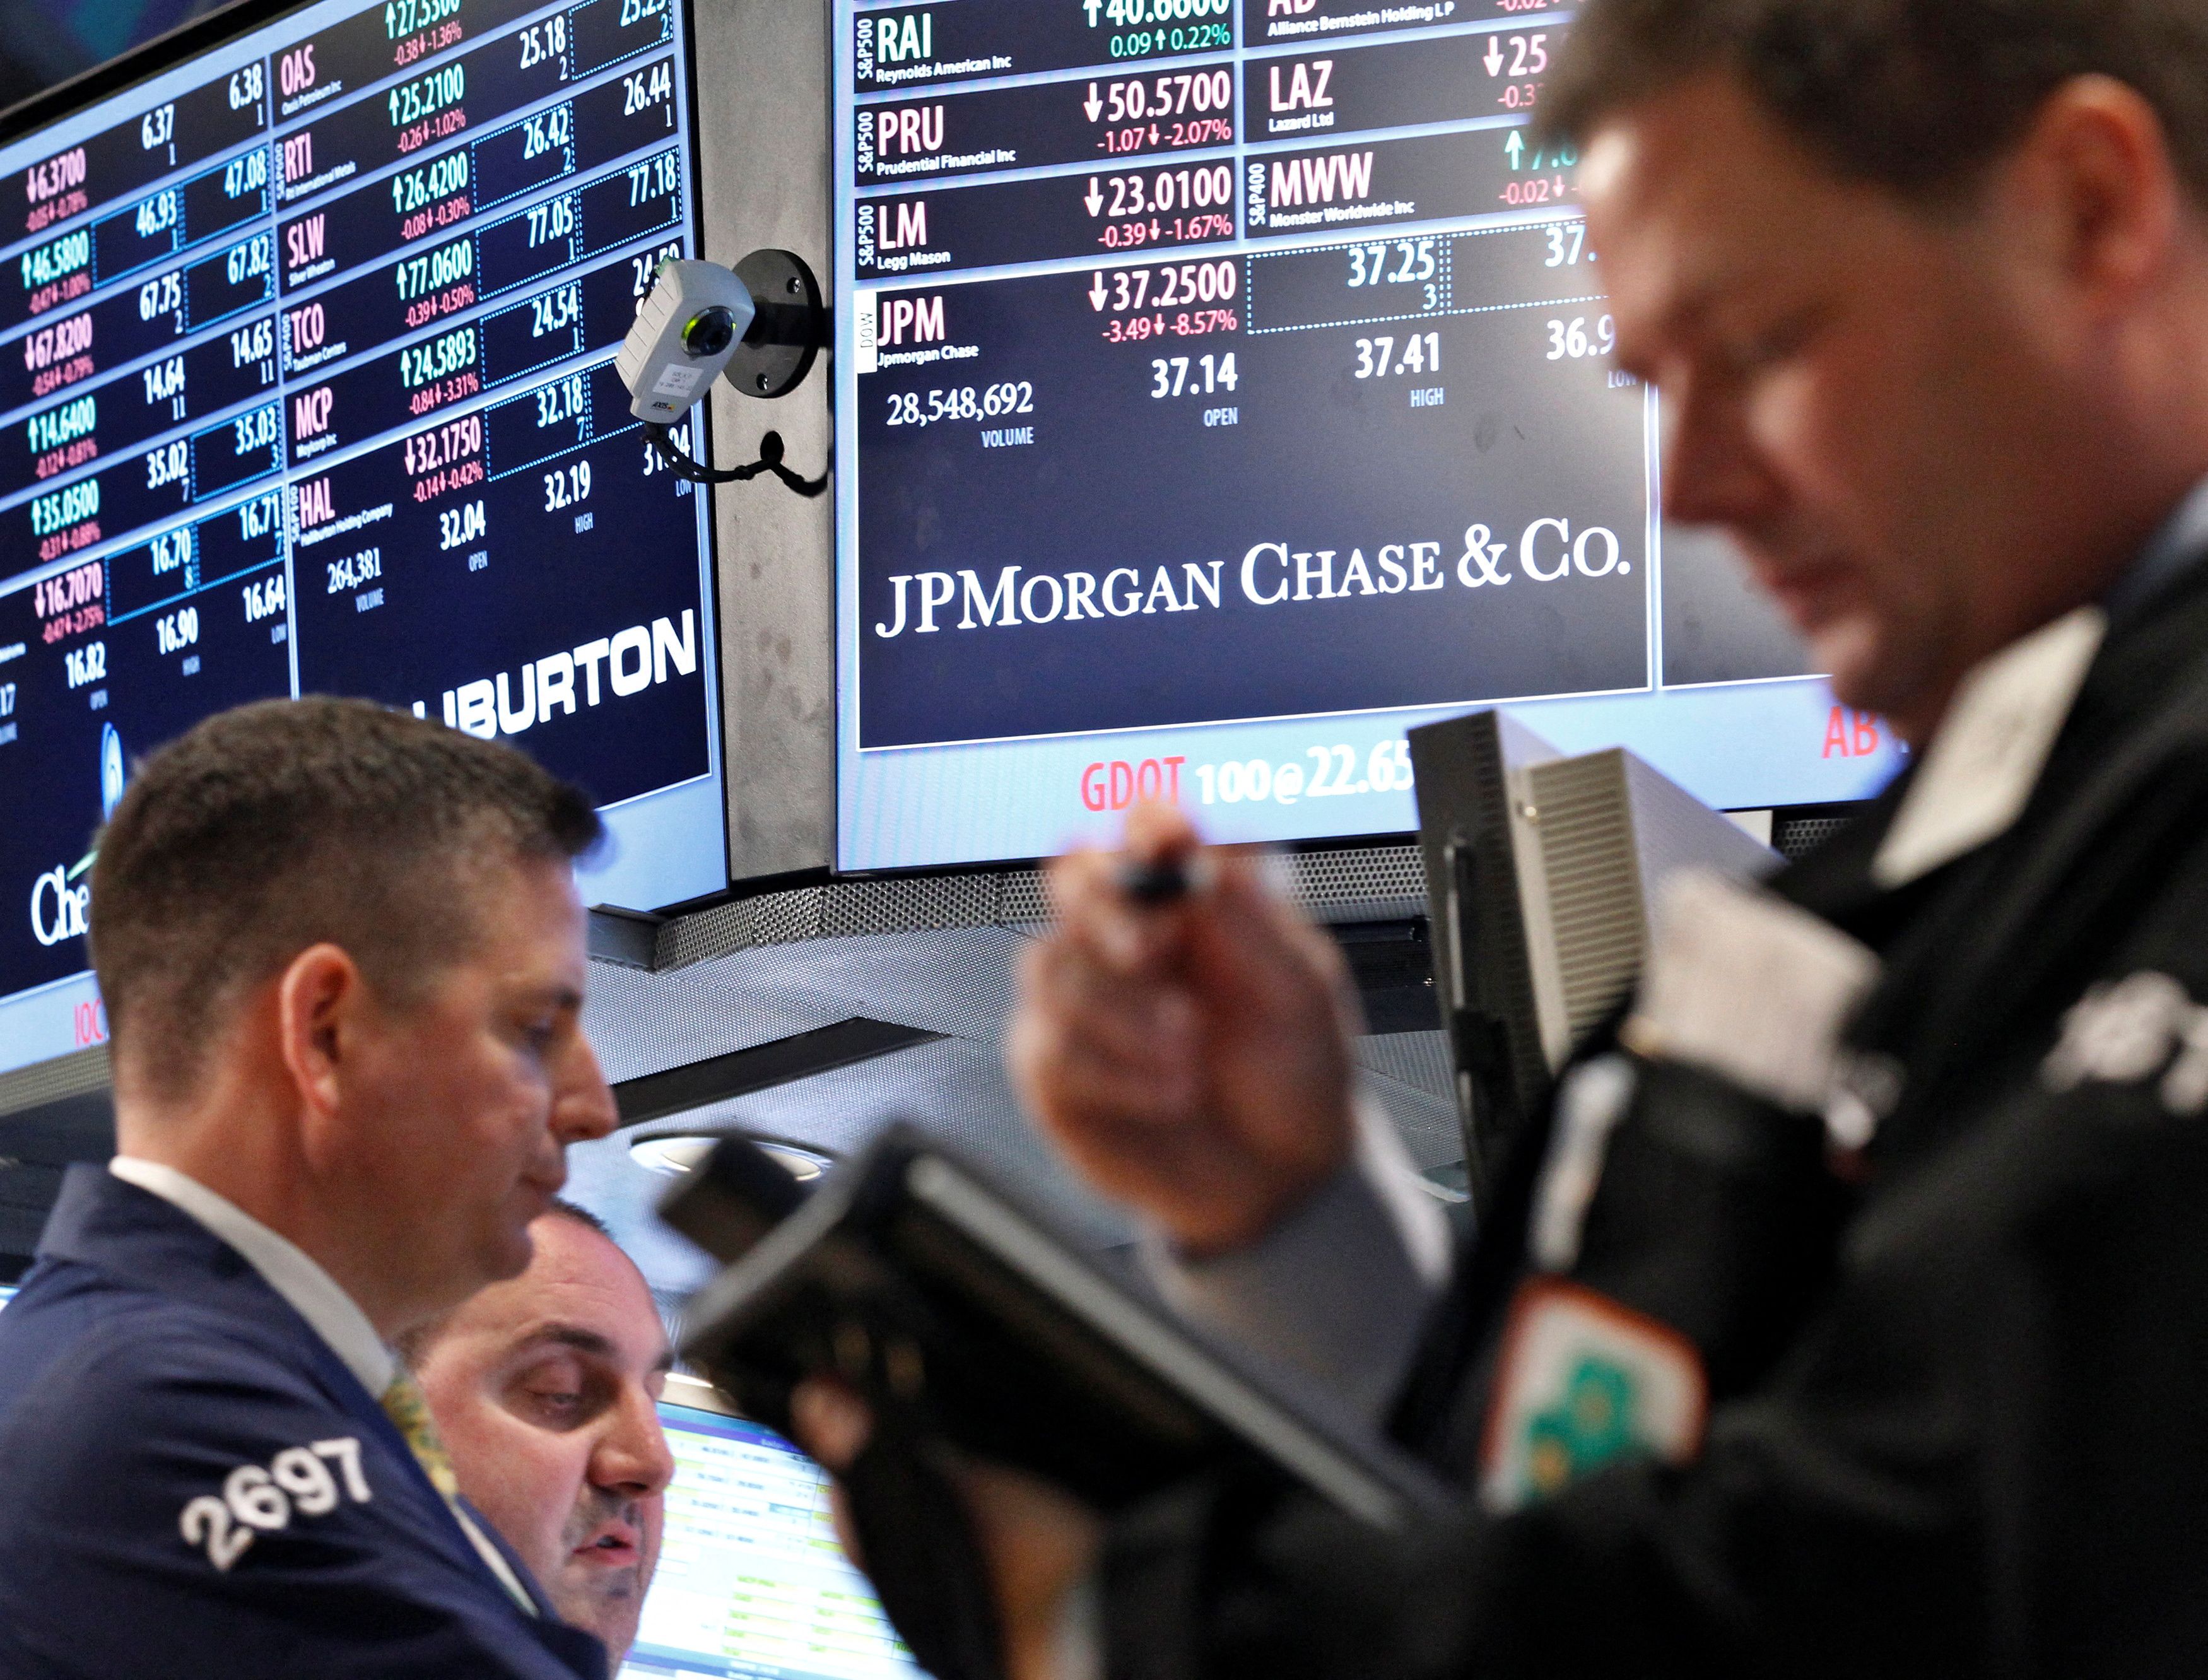 Traders work at the post that trades JP Morgan on the floor of the New York Stock Exchange